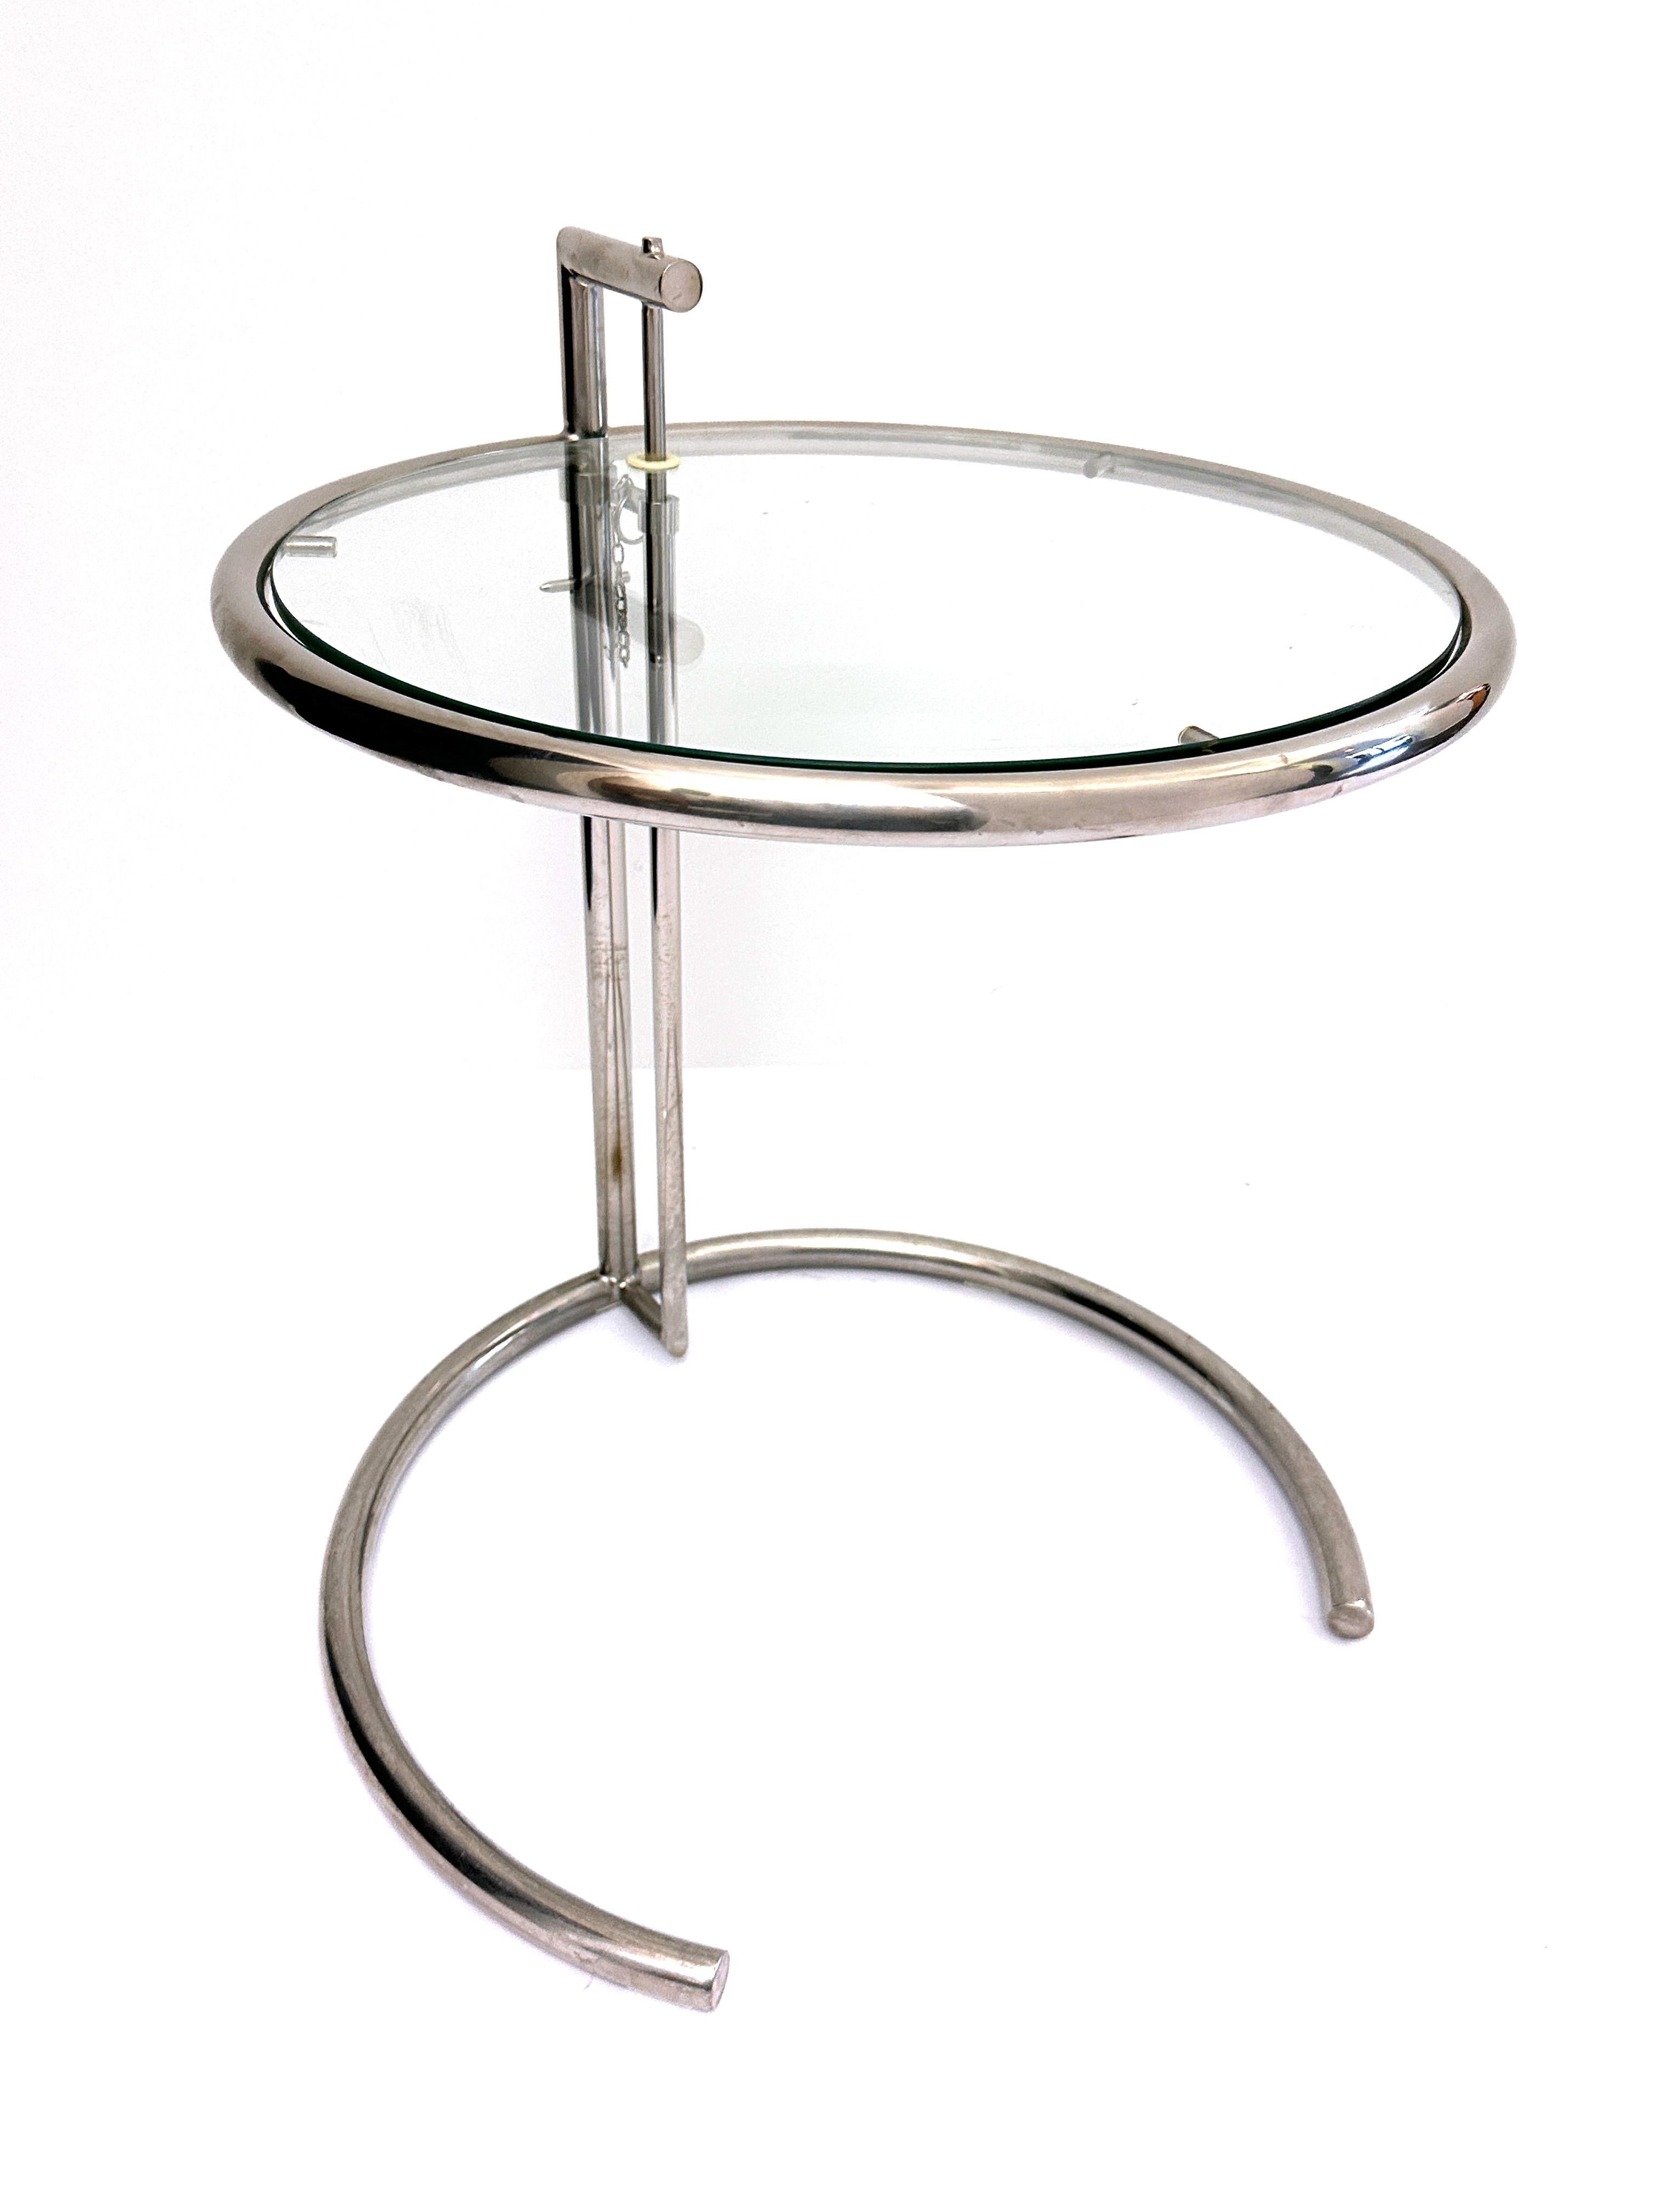 A chrome and glass accent table attributed to the E-1027 design by Eileen Gray. This elegant and well designed piece has an adjustable top that can be moved vertically to fit multiple table top heights. The table has a clear glass top with silver